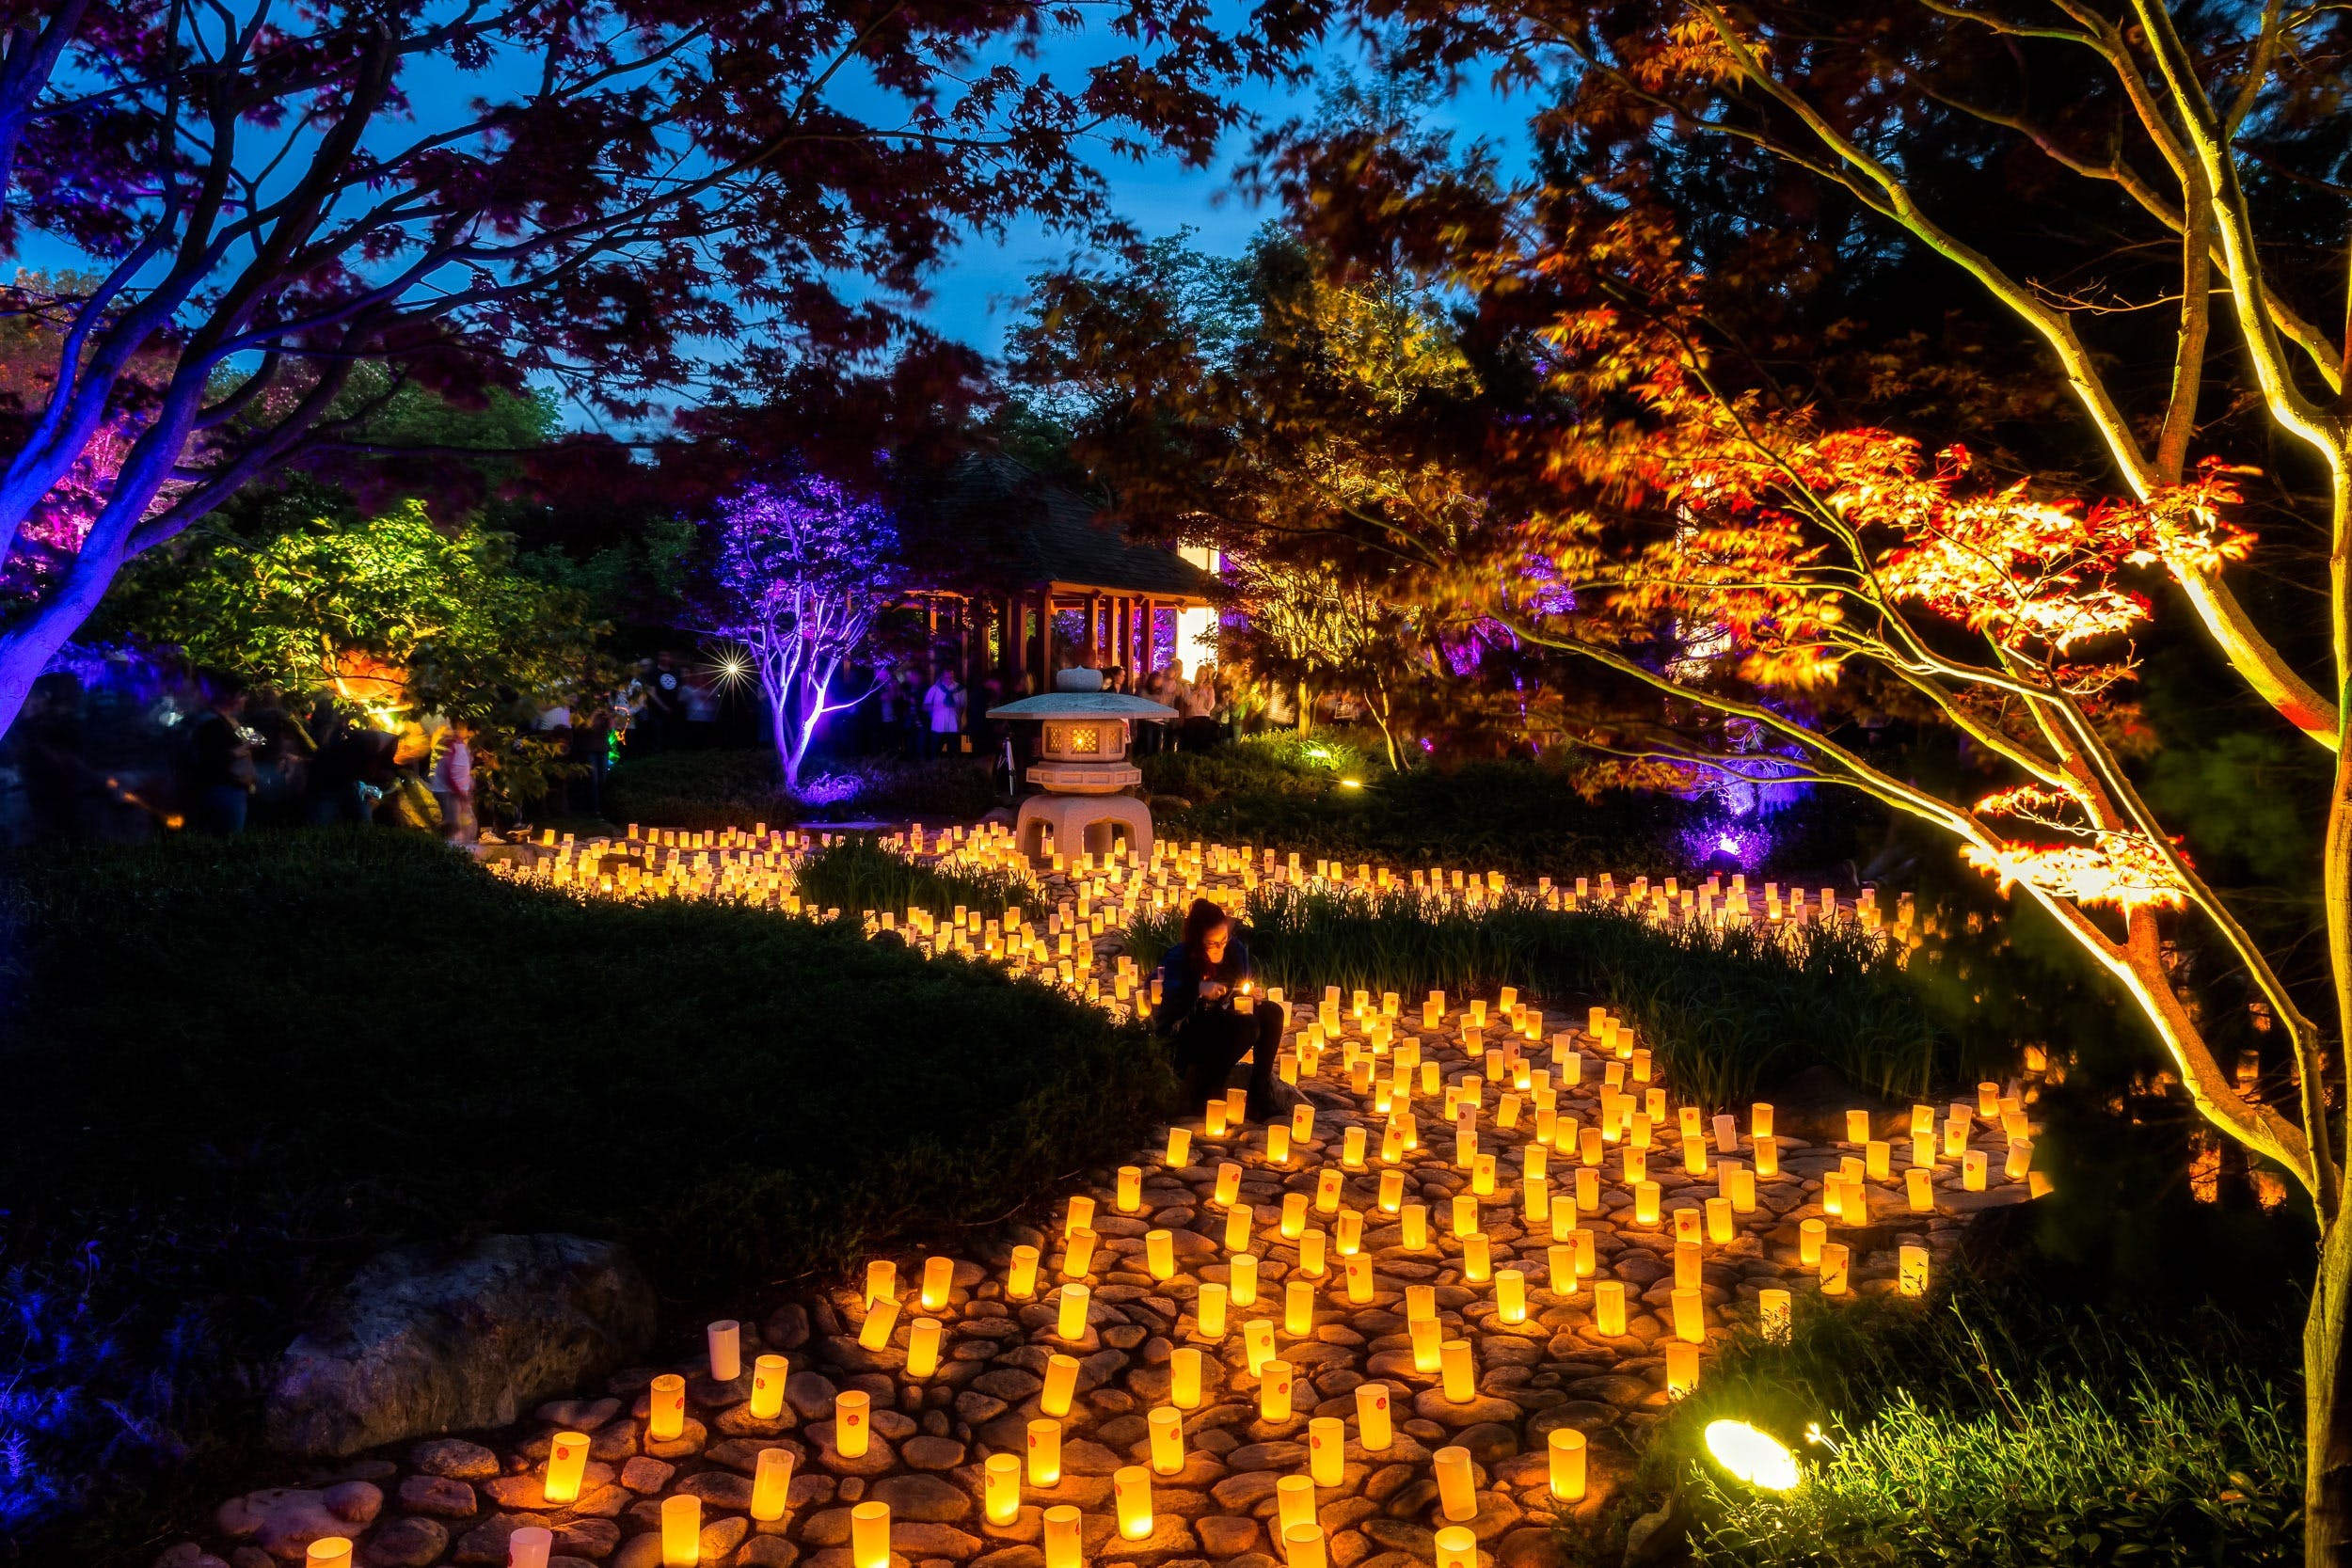 Canberra Nara Candle Festival - Accommodation Guide